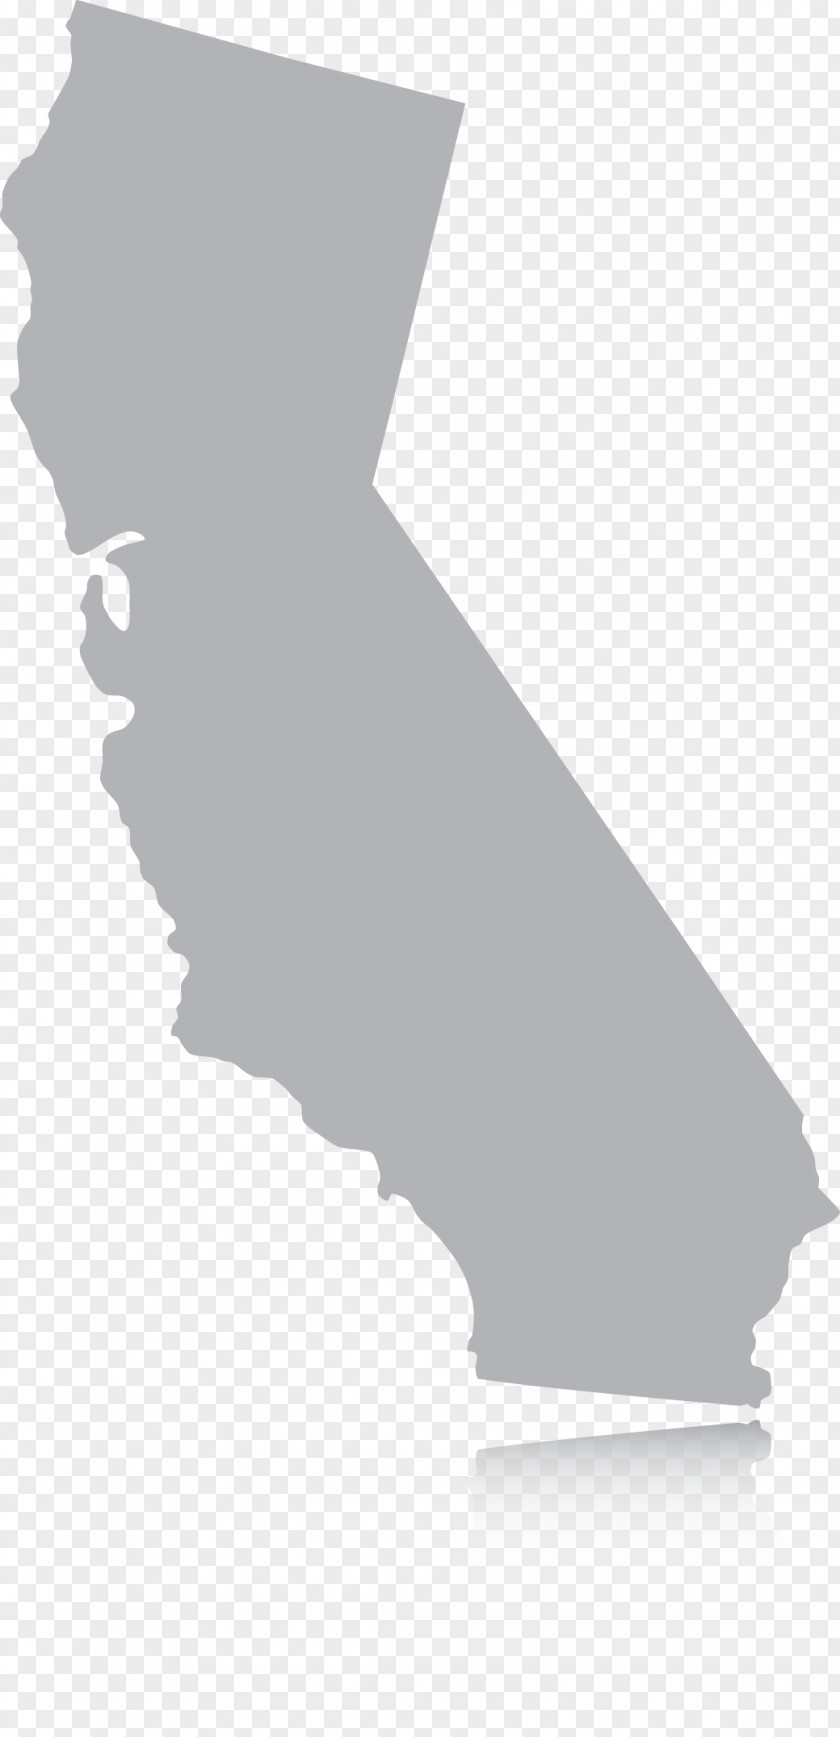 California Outline State Assembly Tax Incentive Clip Art PNG